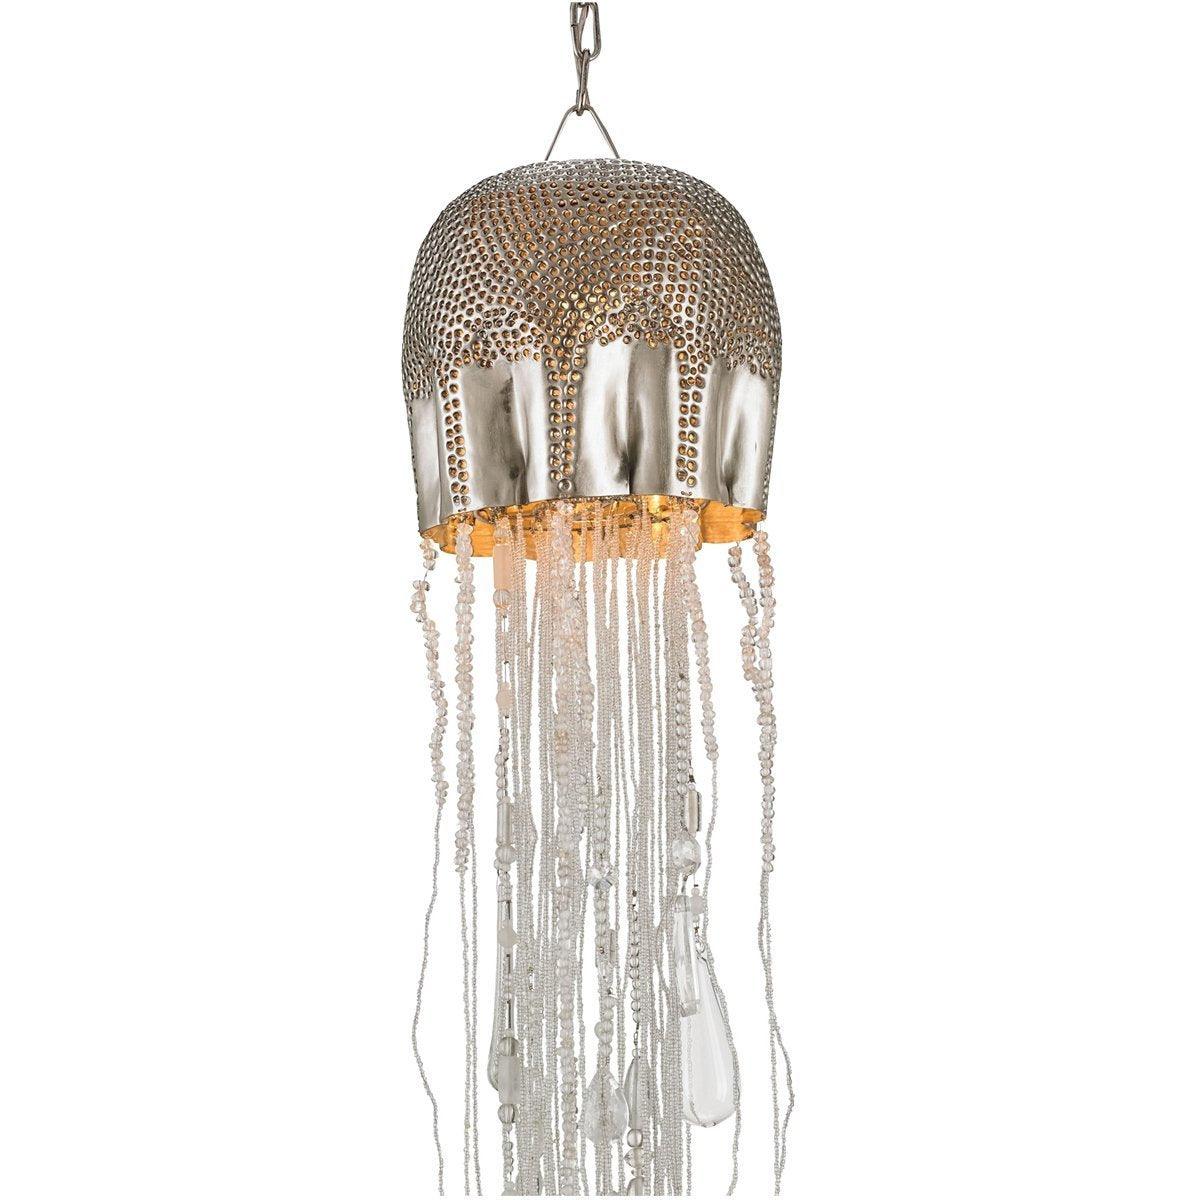 Stunning Jellyfish Sculpture  Handcrafted by The Bead Gallery